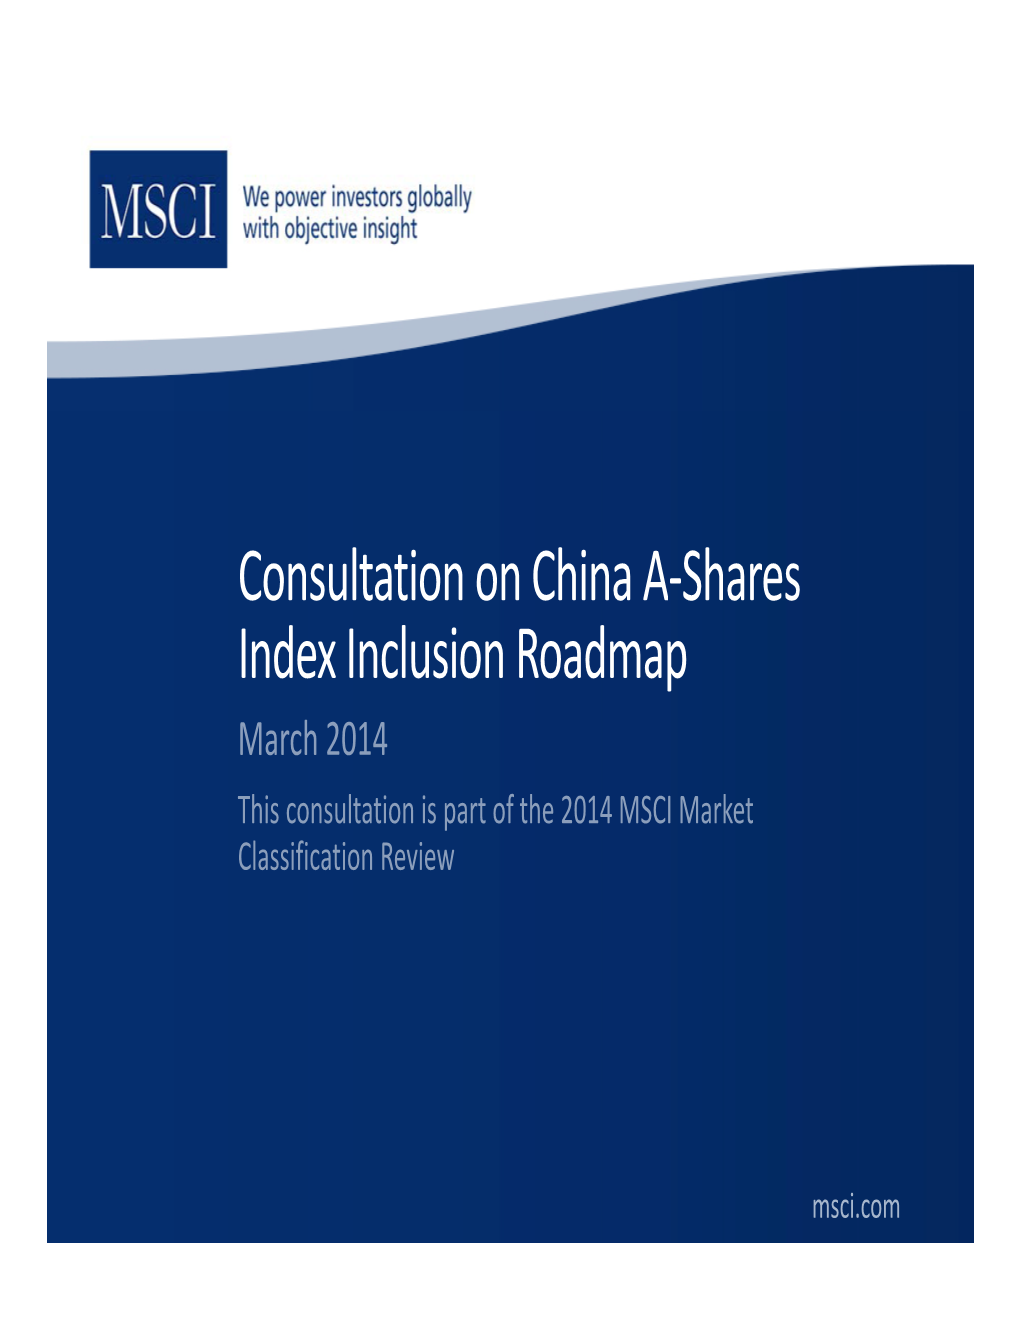 Consultation on China A-Shares Index Inclusion Roadmap